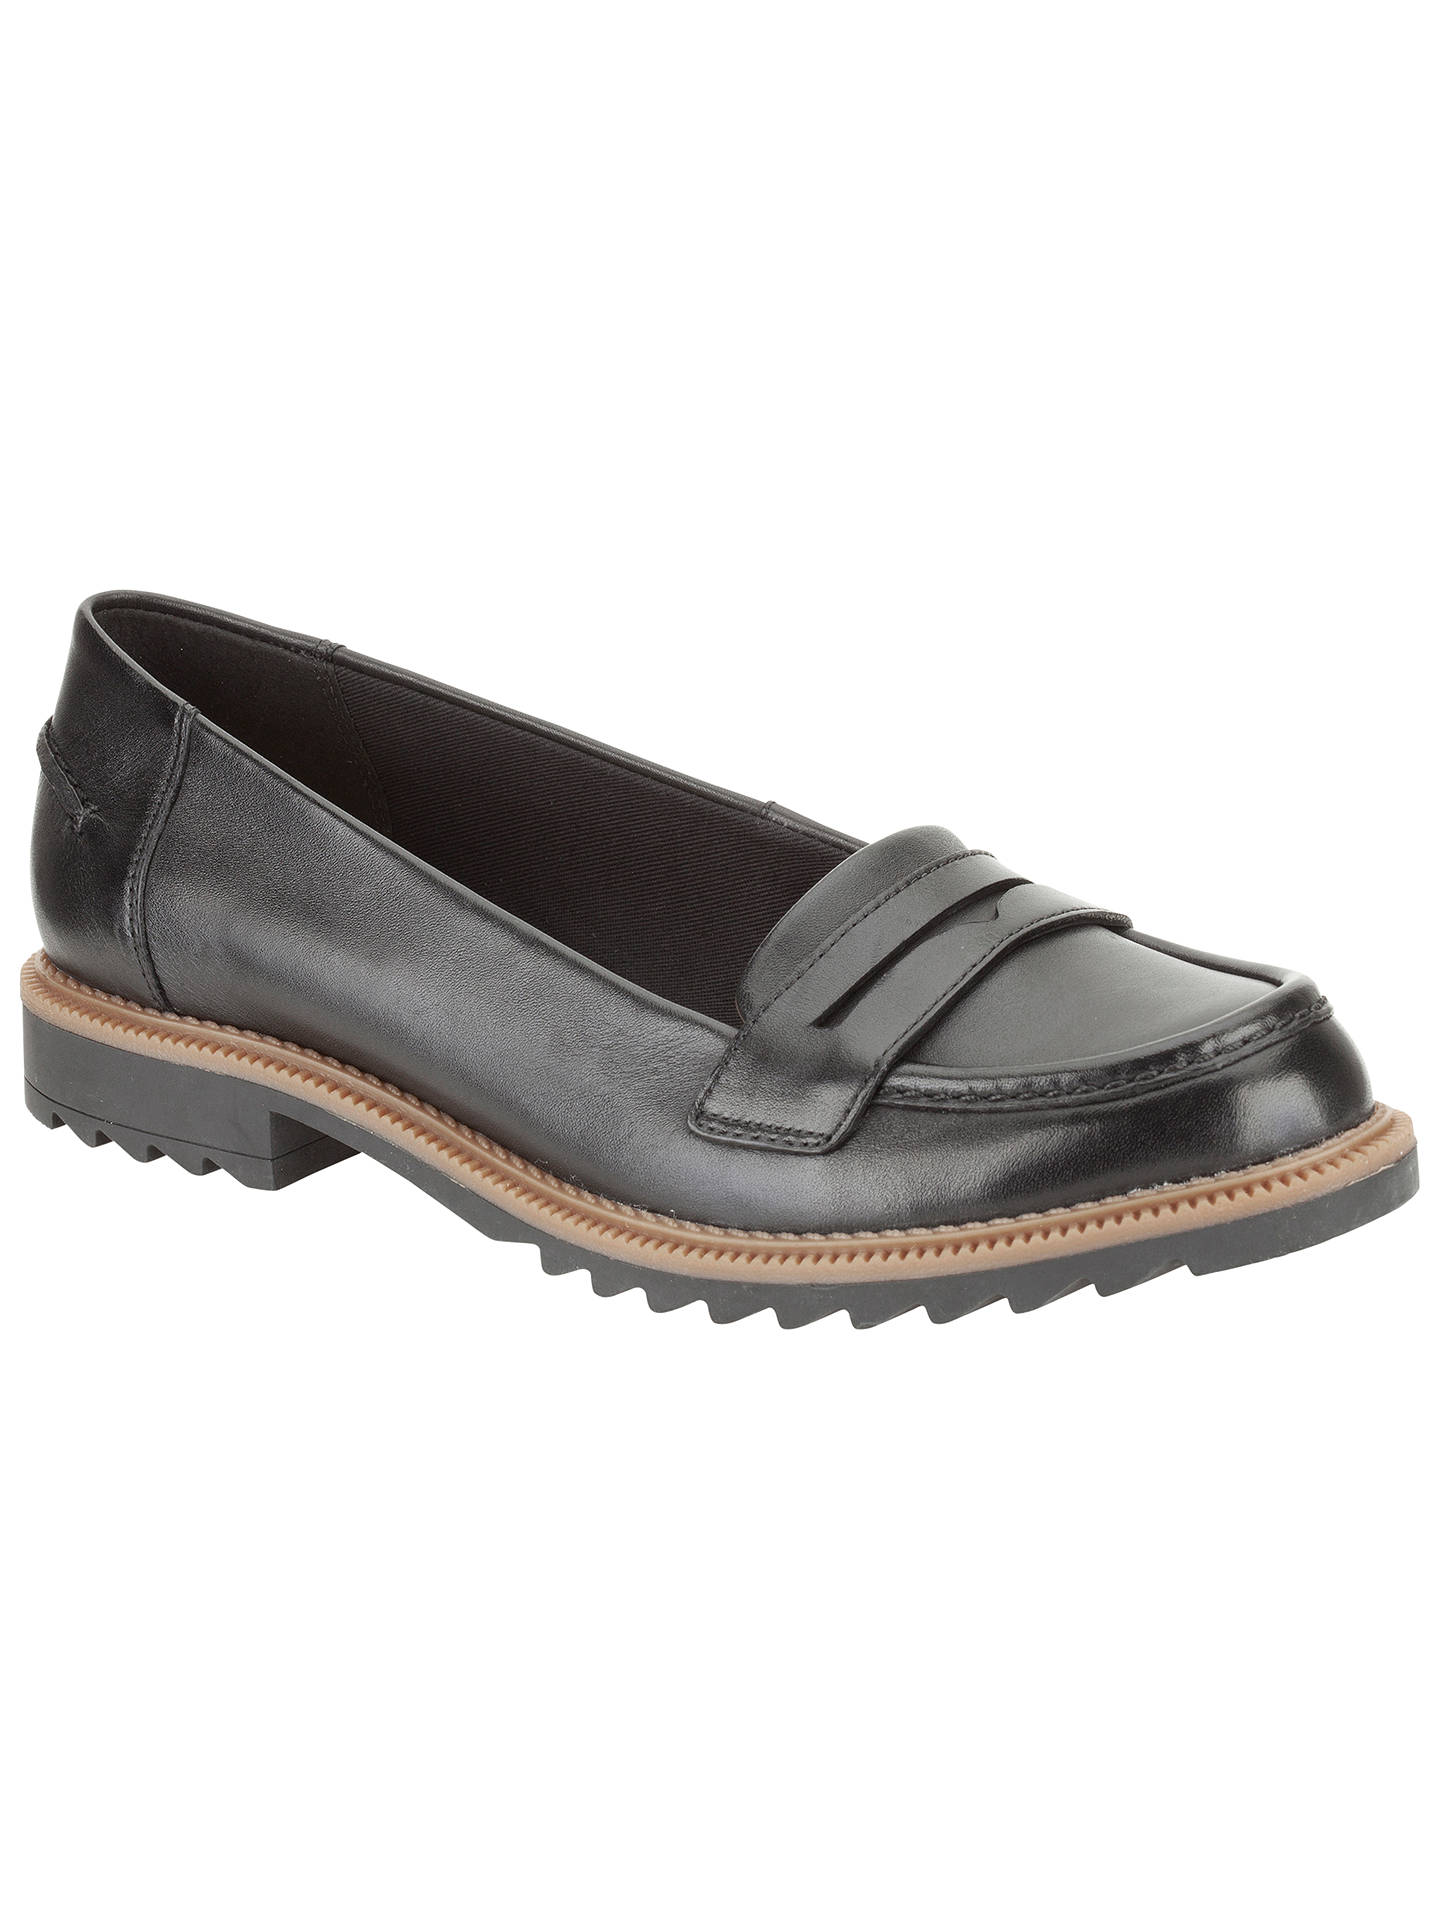 Clarks Griffin Milly Loafers, Black Leather at John Lewis & Partners